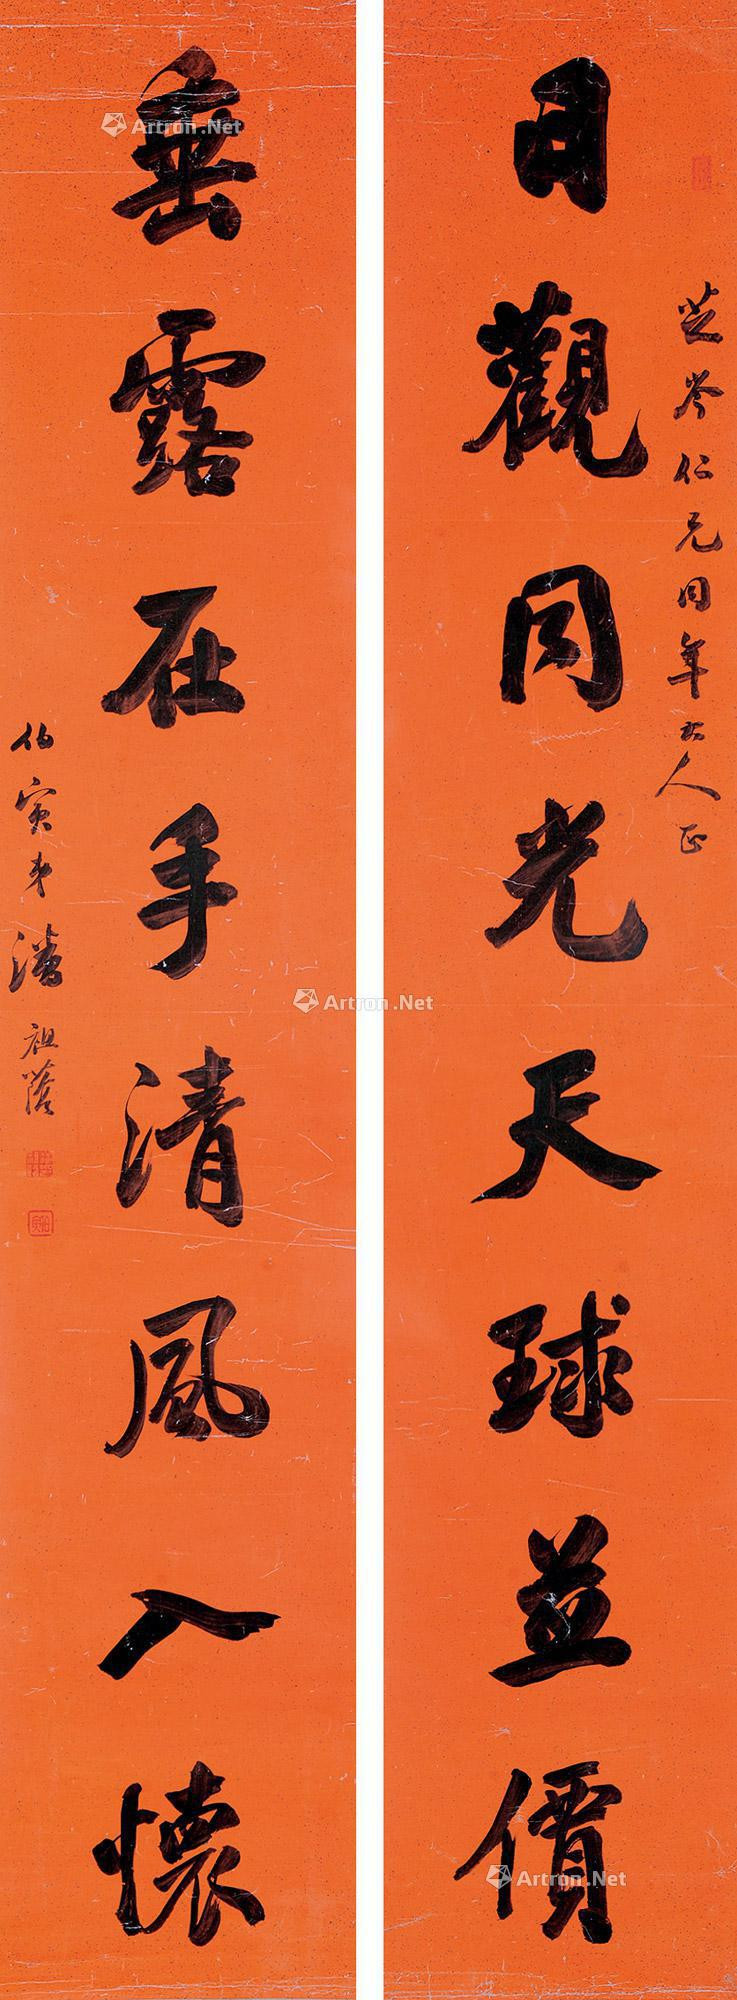 EIGHT-CHARACTER CALLIGRAPHY COUPLET IN RUNNING SCRIPT